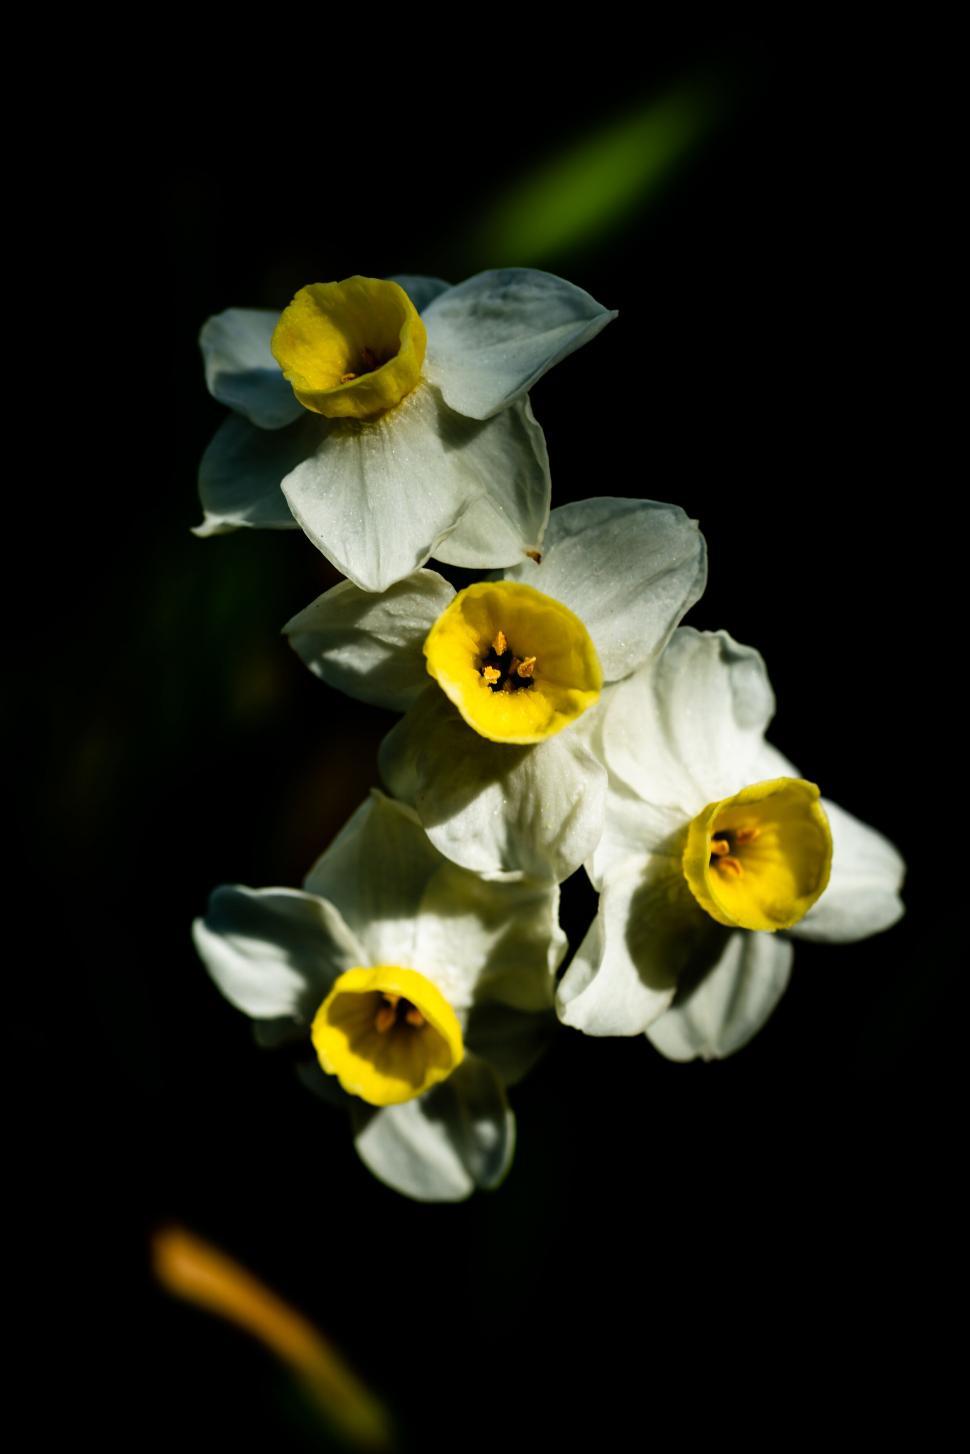 Free Image of Cluster of yellow daffodils in shadow 